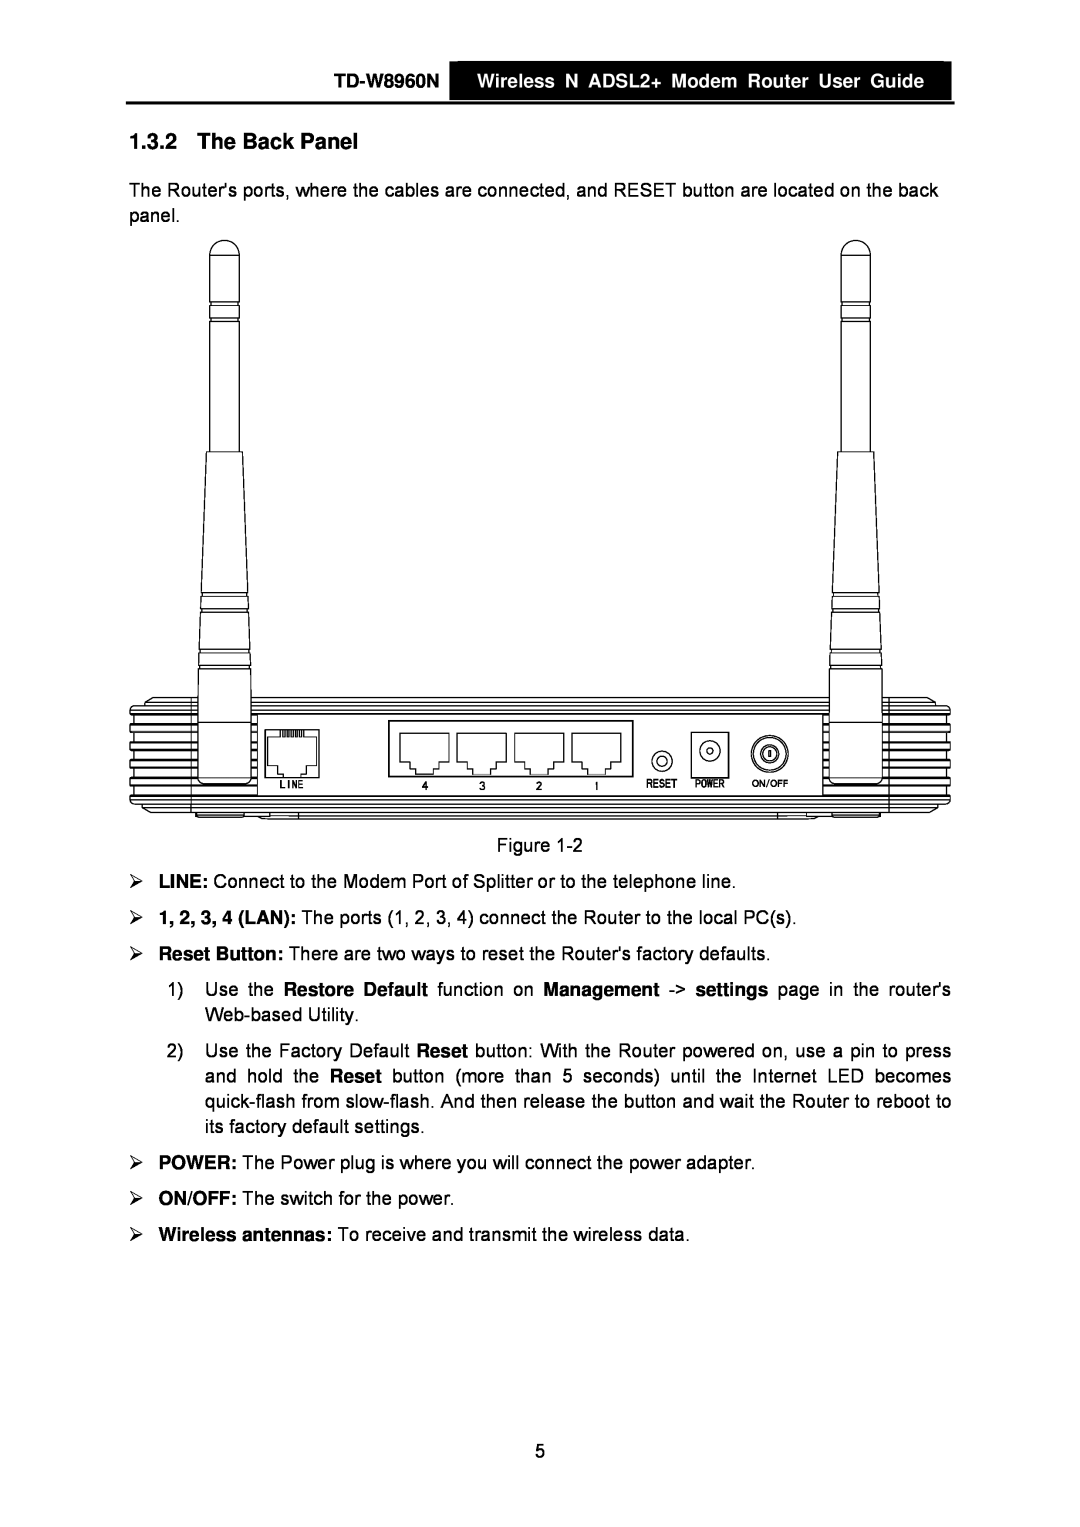 TP-Link manual The Back Panel, TD-W8960N Wireless N ADSL2+ Modem Router User Guide 